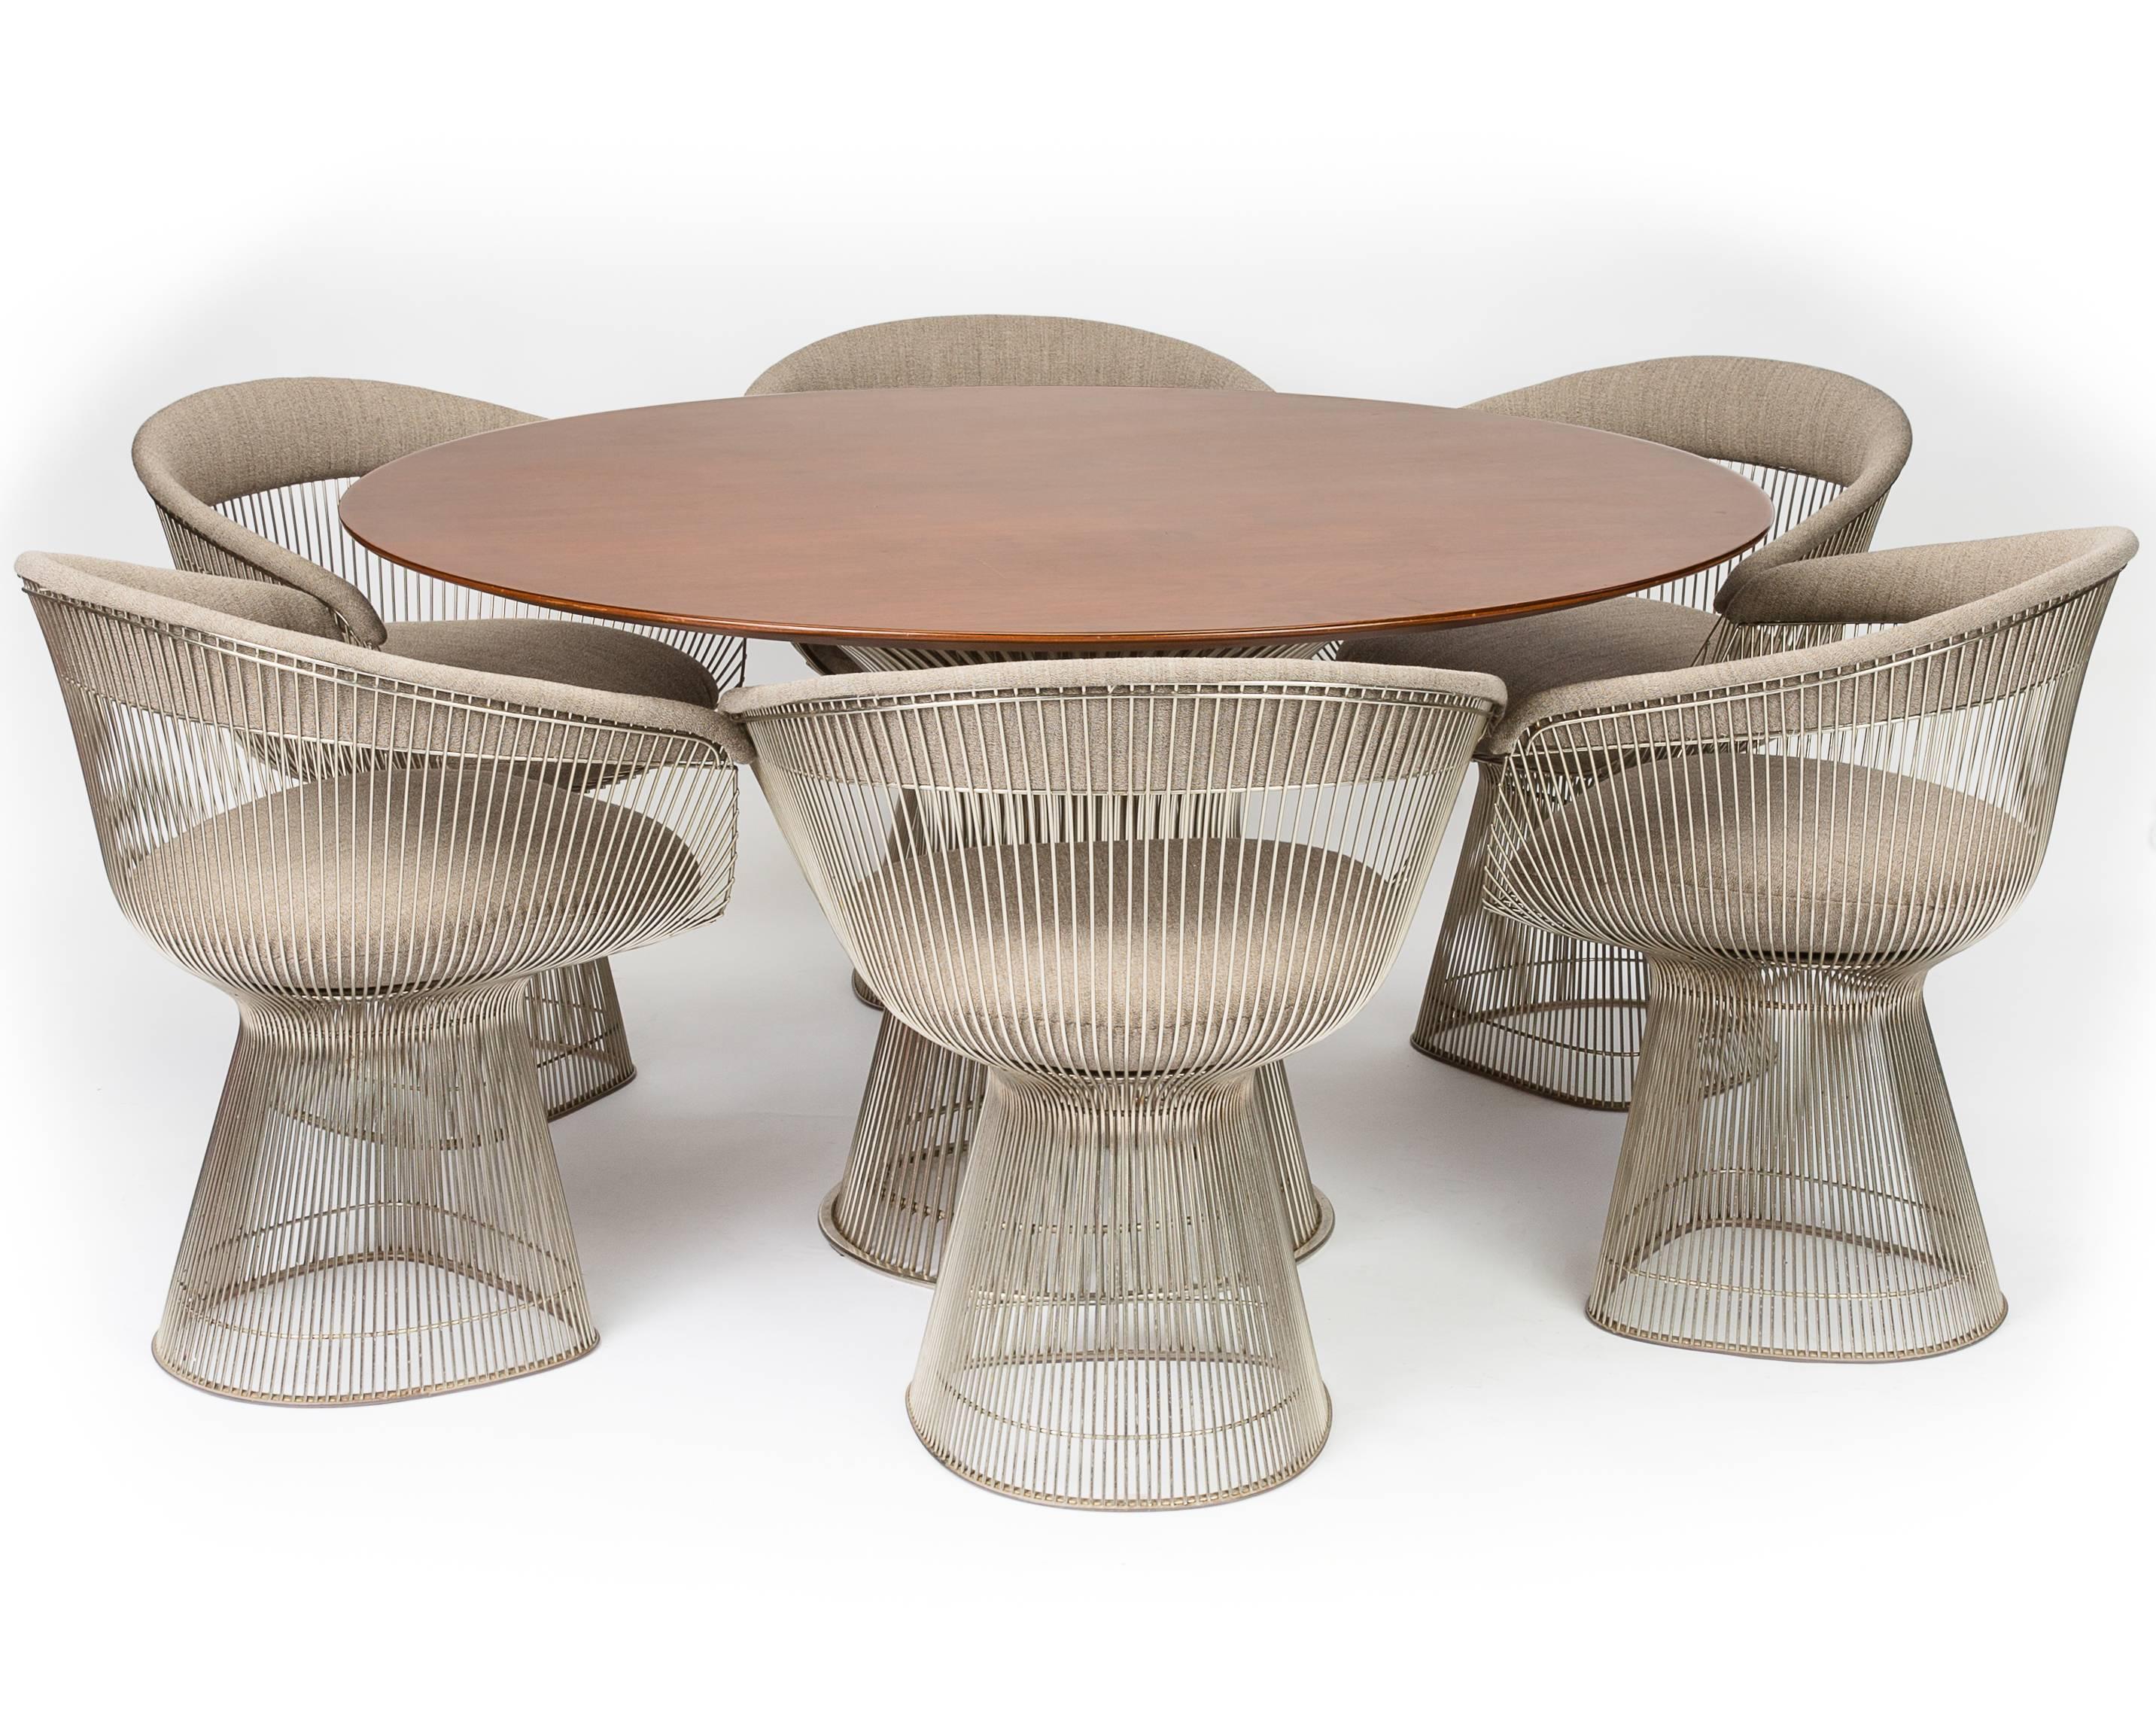 Platner dining set; USA, 1980s; manufactured by Knoll; nickel-plated steel, walnut and upholstery. Set includes 54